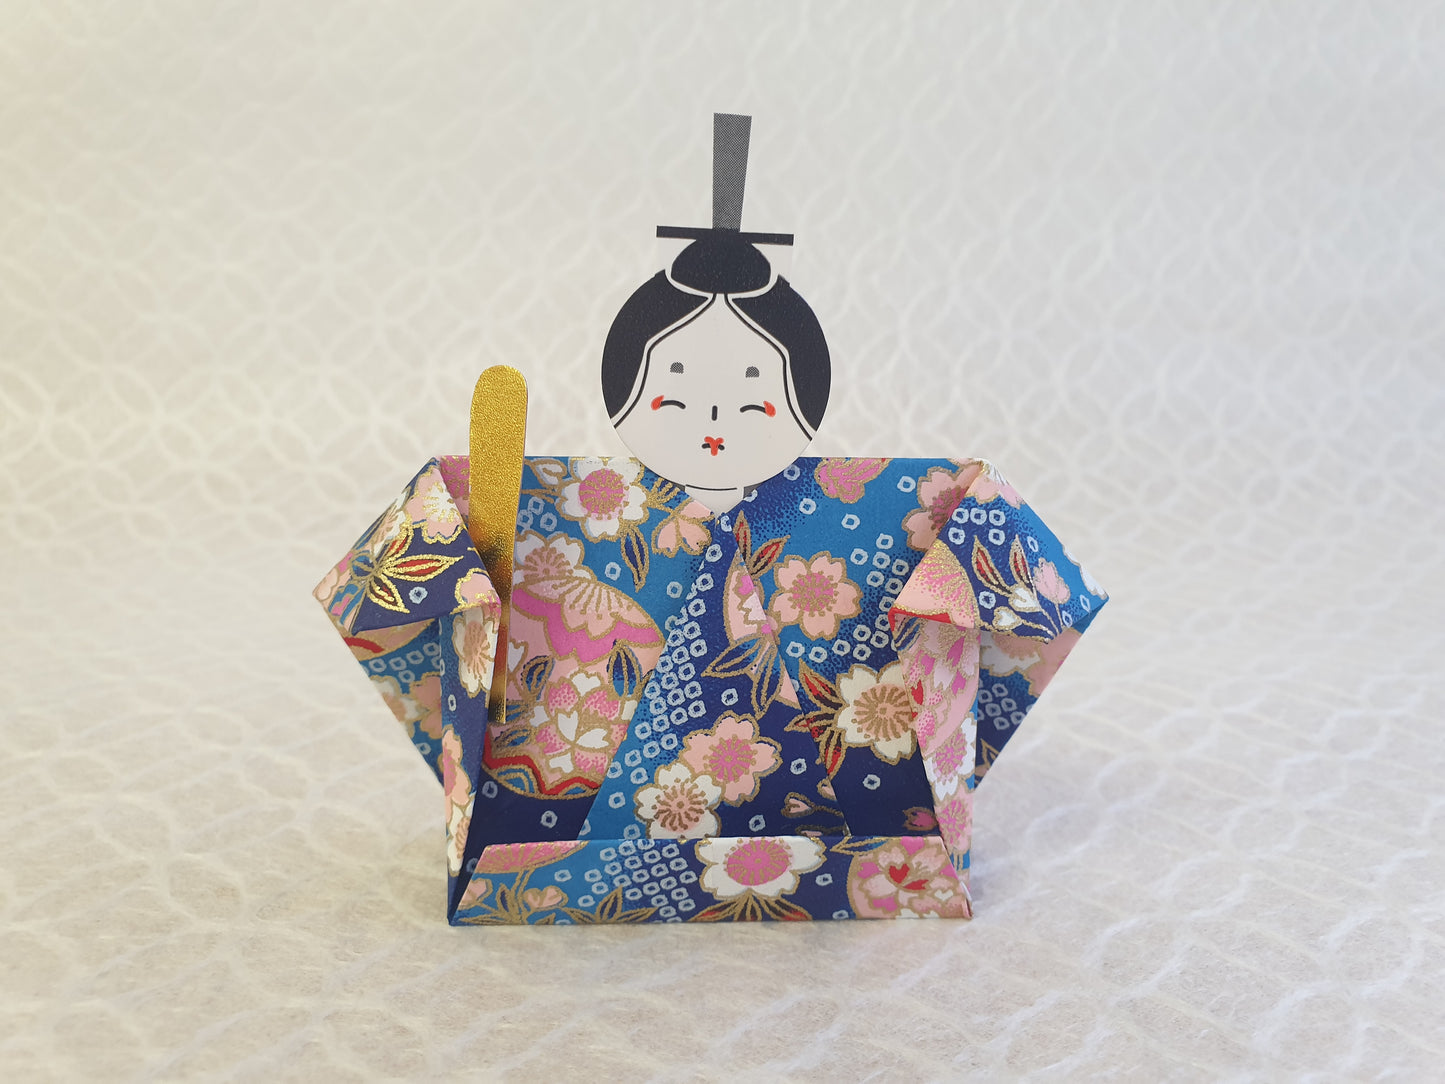 TSUKUTTE-YA’s Hina Dolls (ひな人形) Origami DIY kit is based on Japanese traditional “Girls day festival”. Hina Dolls Origami DIY kit is designed by Ochanomizu Origami Kaikan a Japanese original Origami creator. Send from Japan, make Japan quality DIY kit at home to add a touch of Japan in your daily life.